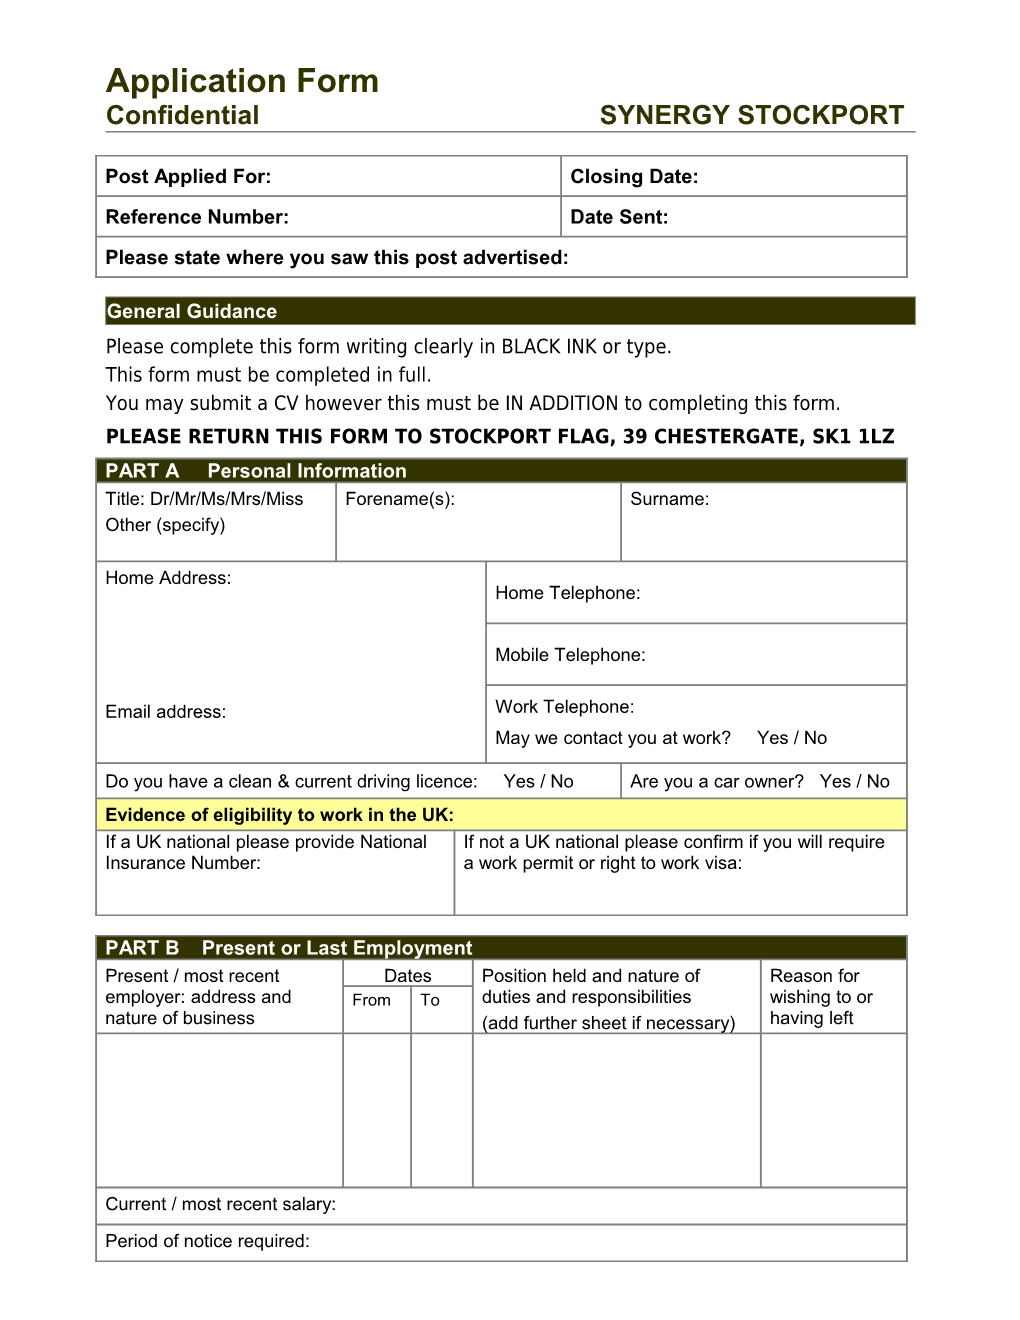 Please Complete This Form in Black Ink Or Type, for Photocopying Purposes, and Return It